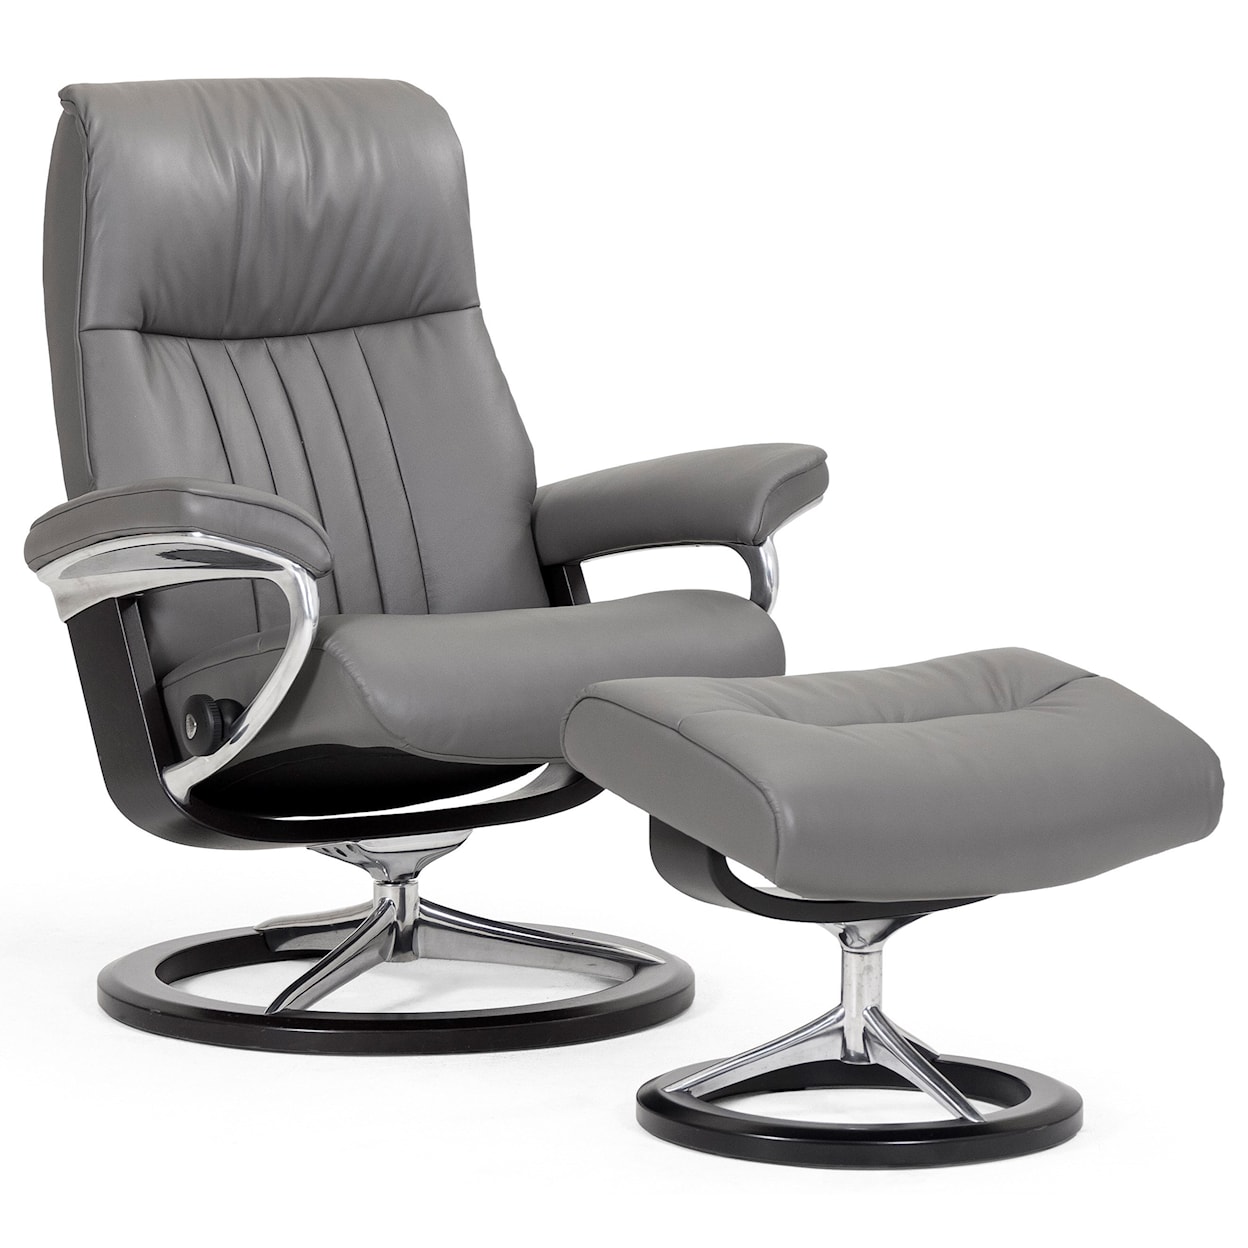 Stressless by Ekornes Stressless by Ekornes Large Chair & Ottoman with Signature Base